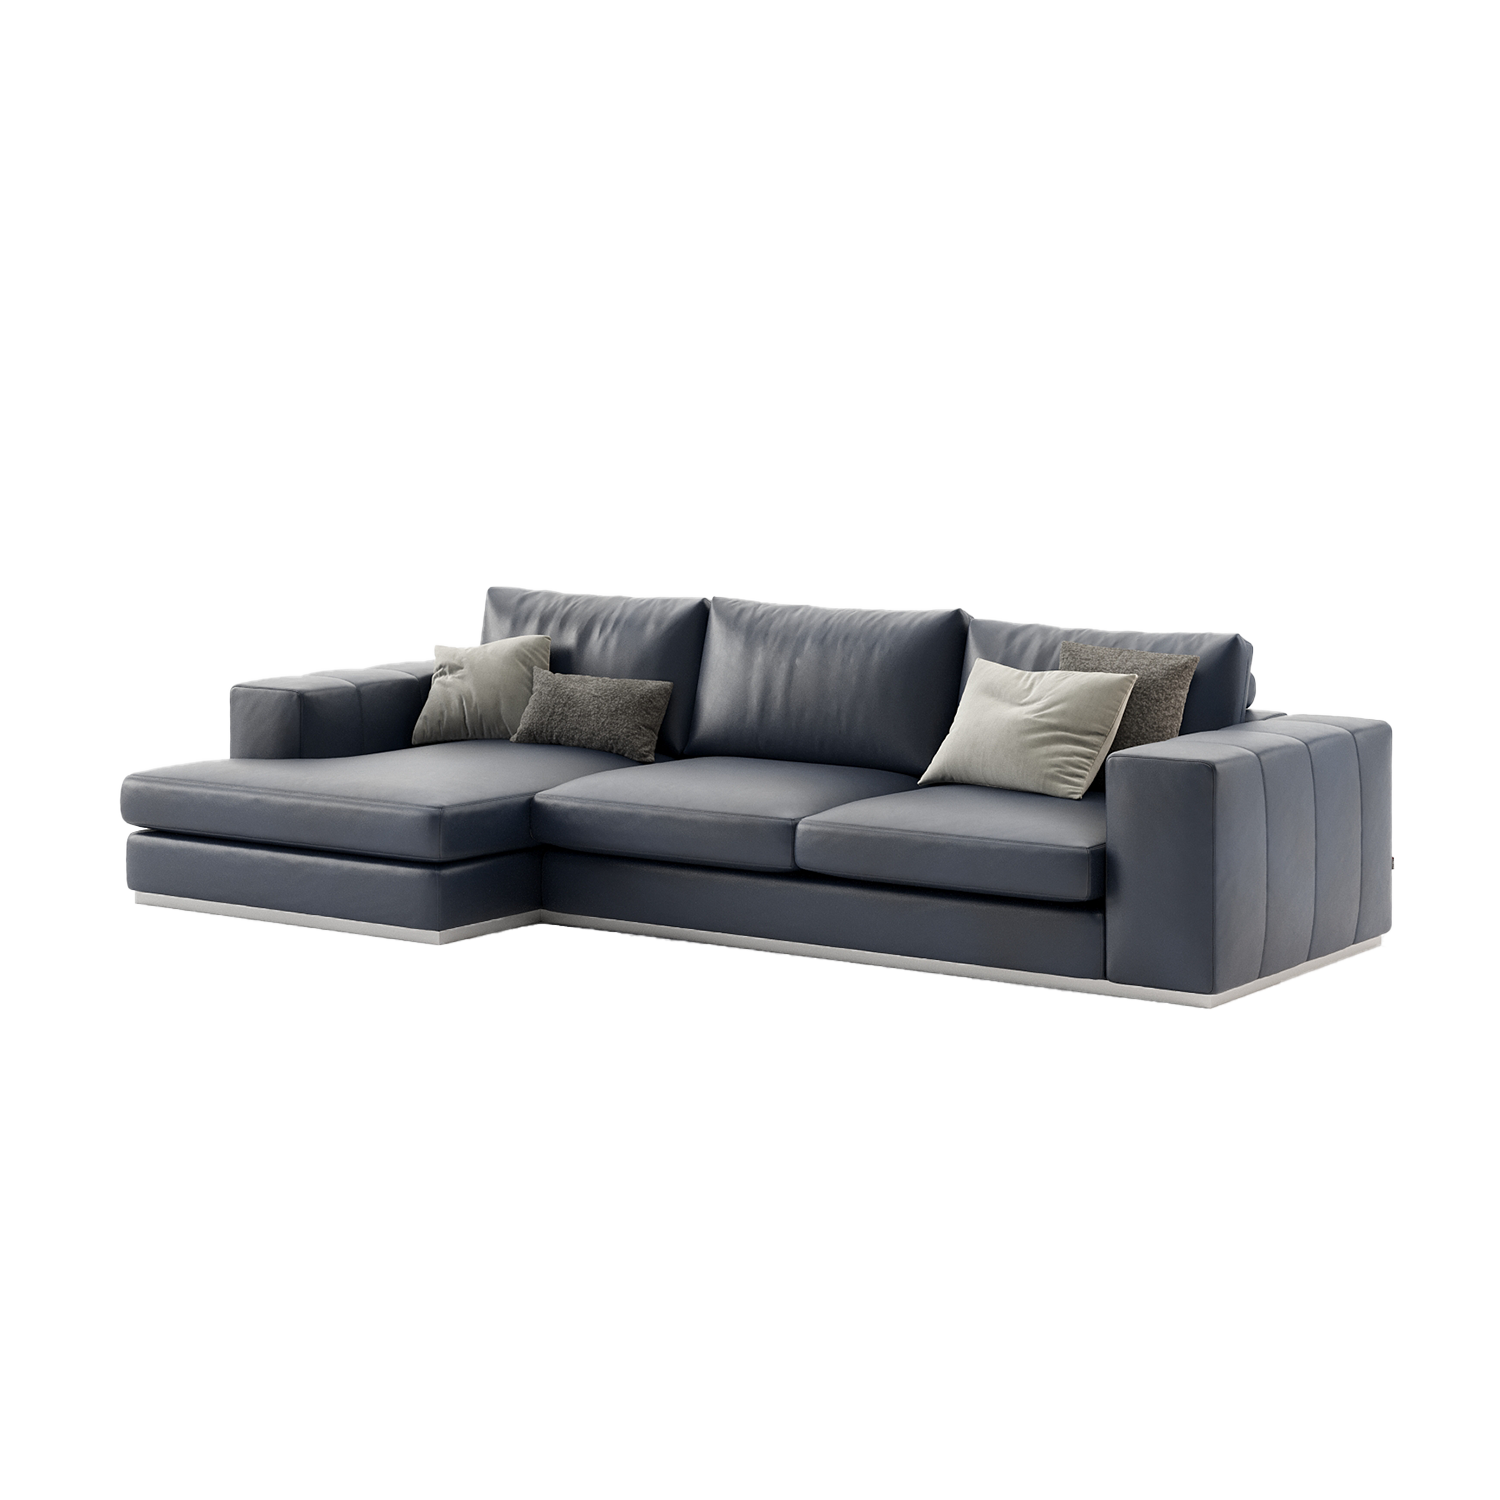 Charlie Sofa with Chaise Lounge